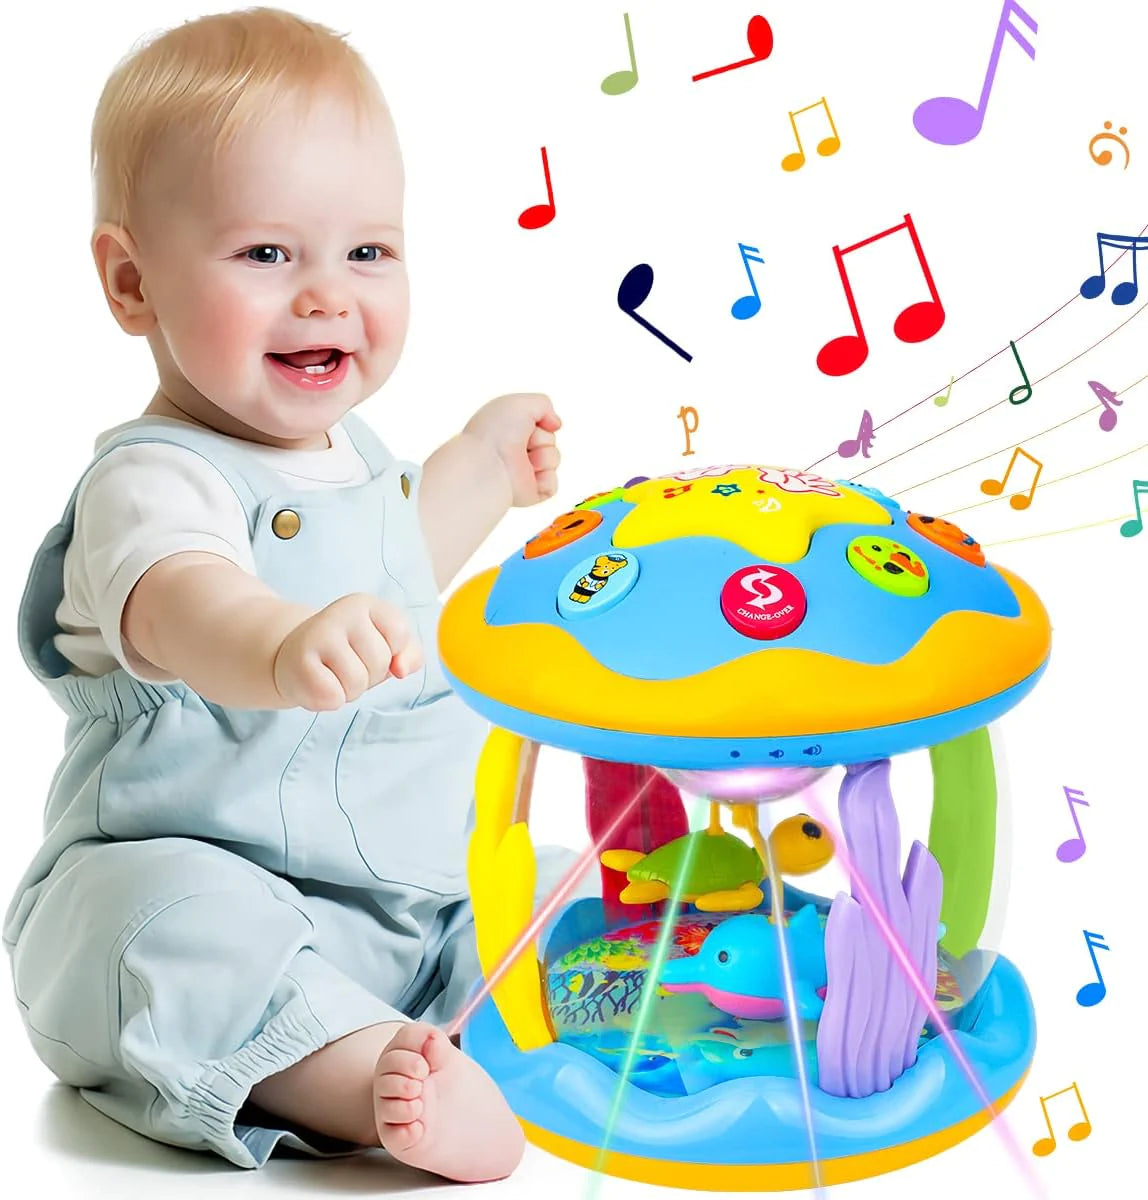 Discover the Magic of Early Learning with Our Exclusive Baby Toys